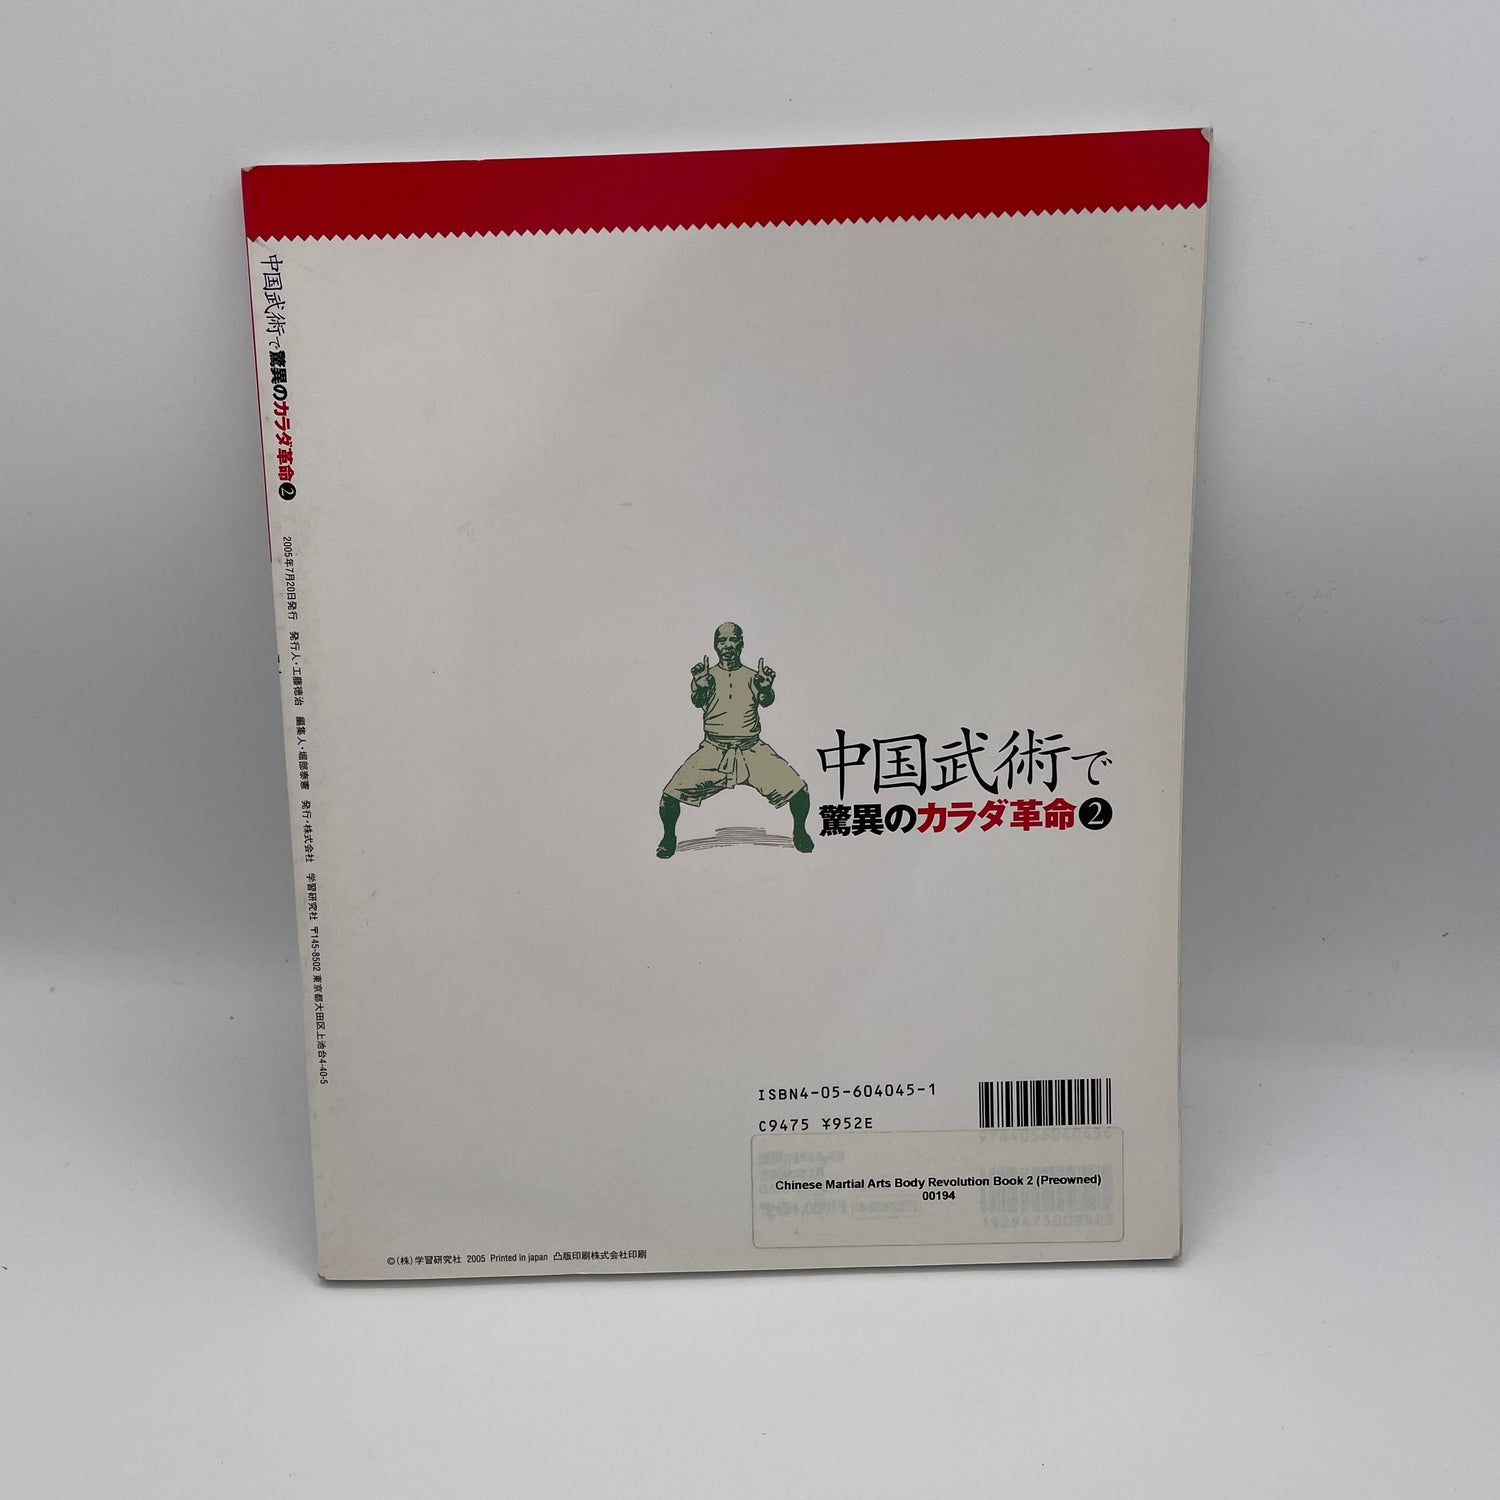 Chinese Martial Arts Body Revolution Book 2 (Preowned)